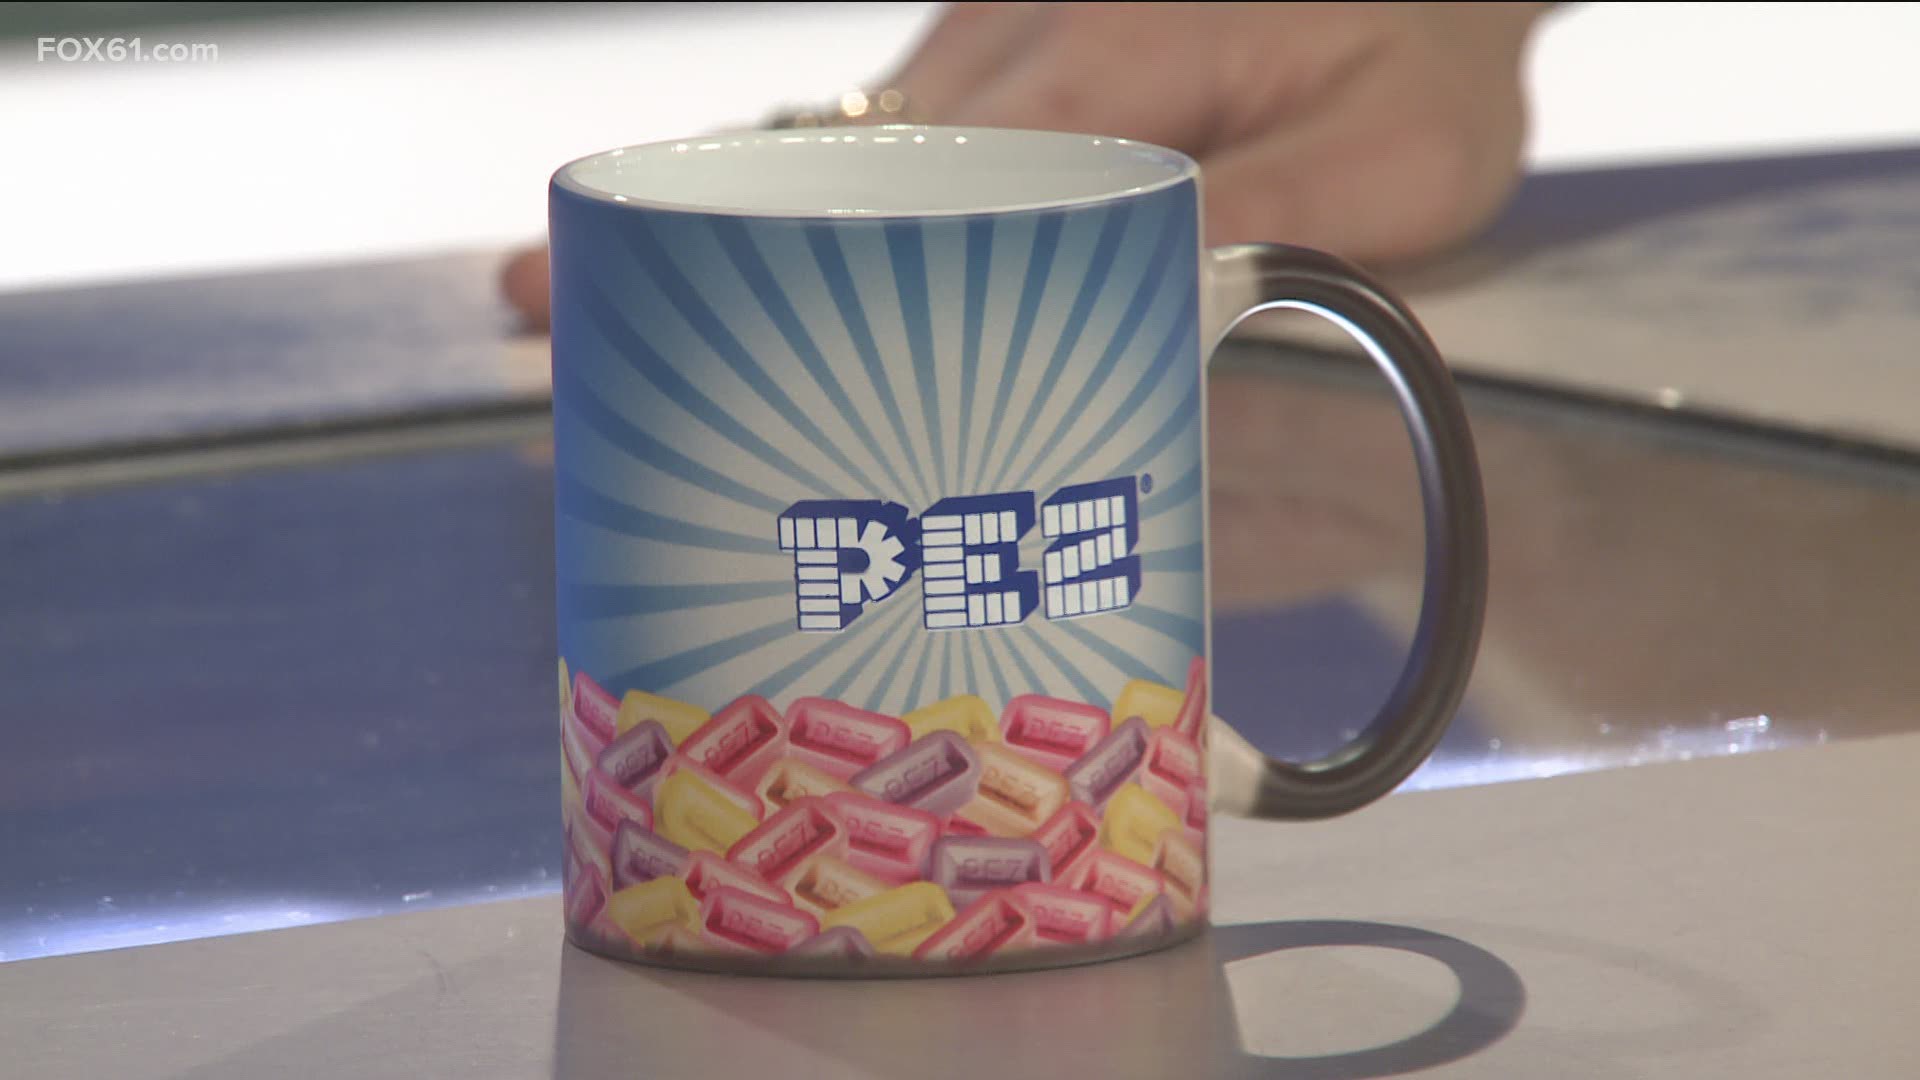 You can submit your coffee cup by emailing share61@fox61.com or use #SHARE61